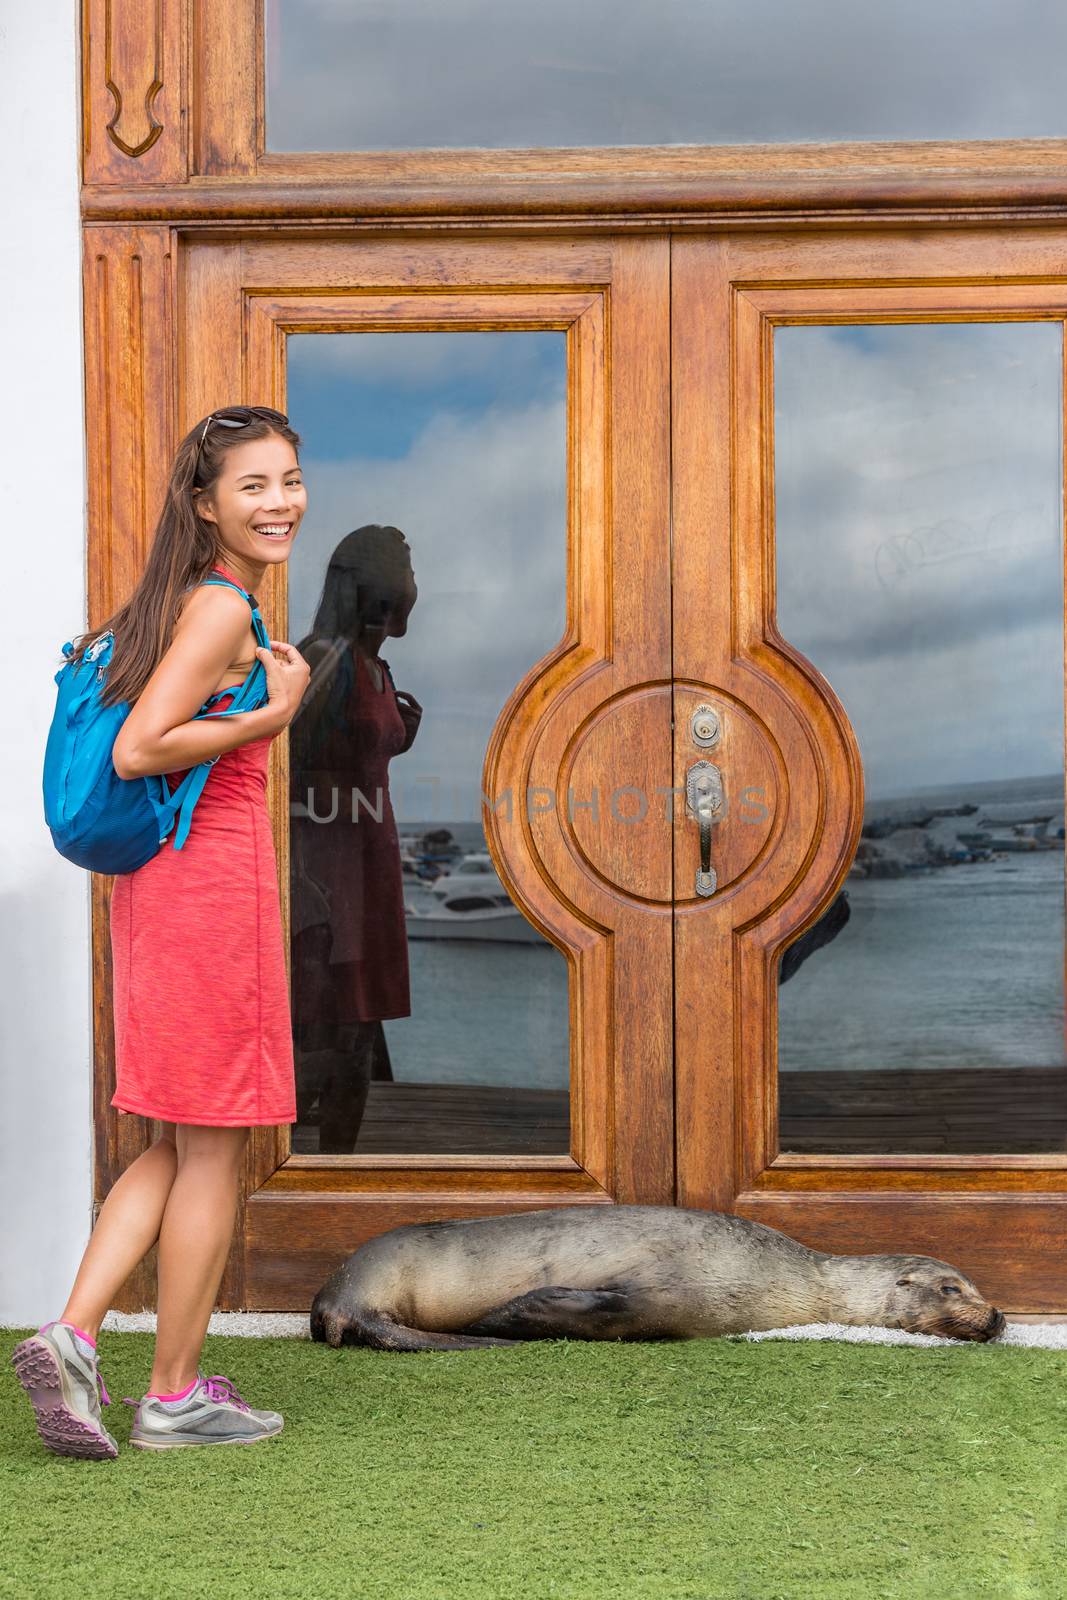 Galapagos tourist funny image with sea lion blocking door to hotel resort by Maridav